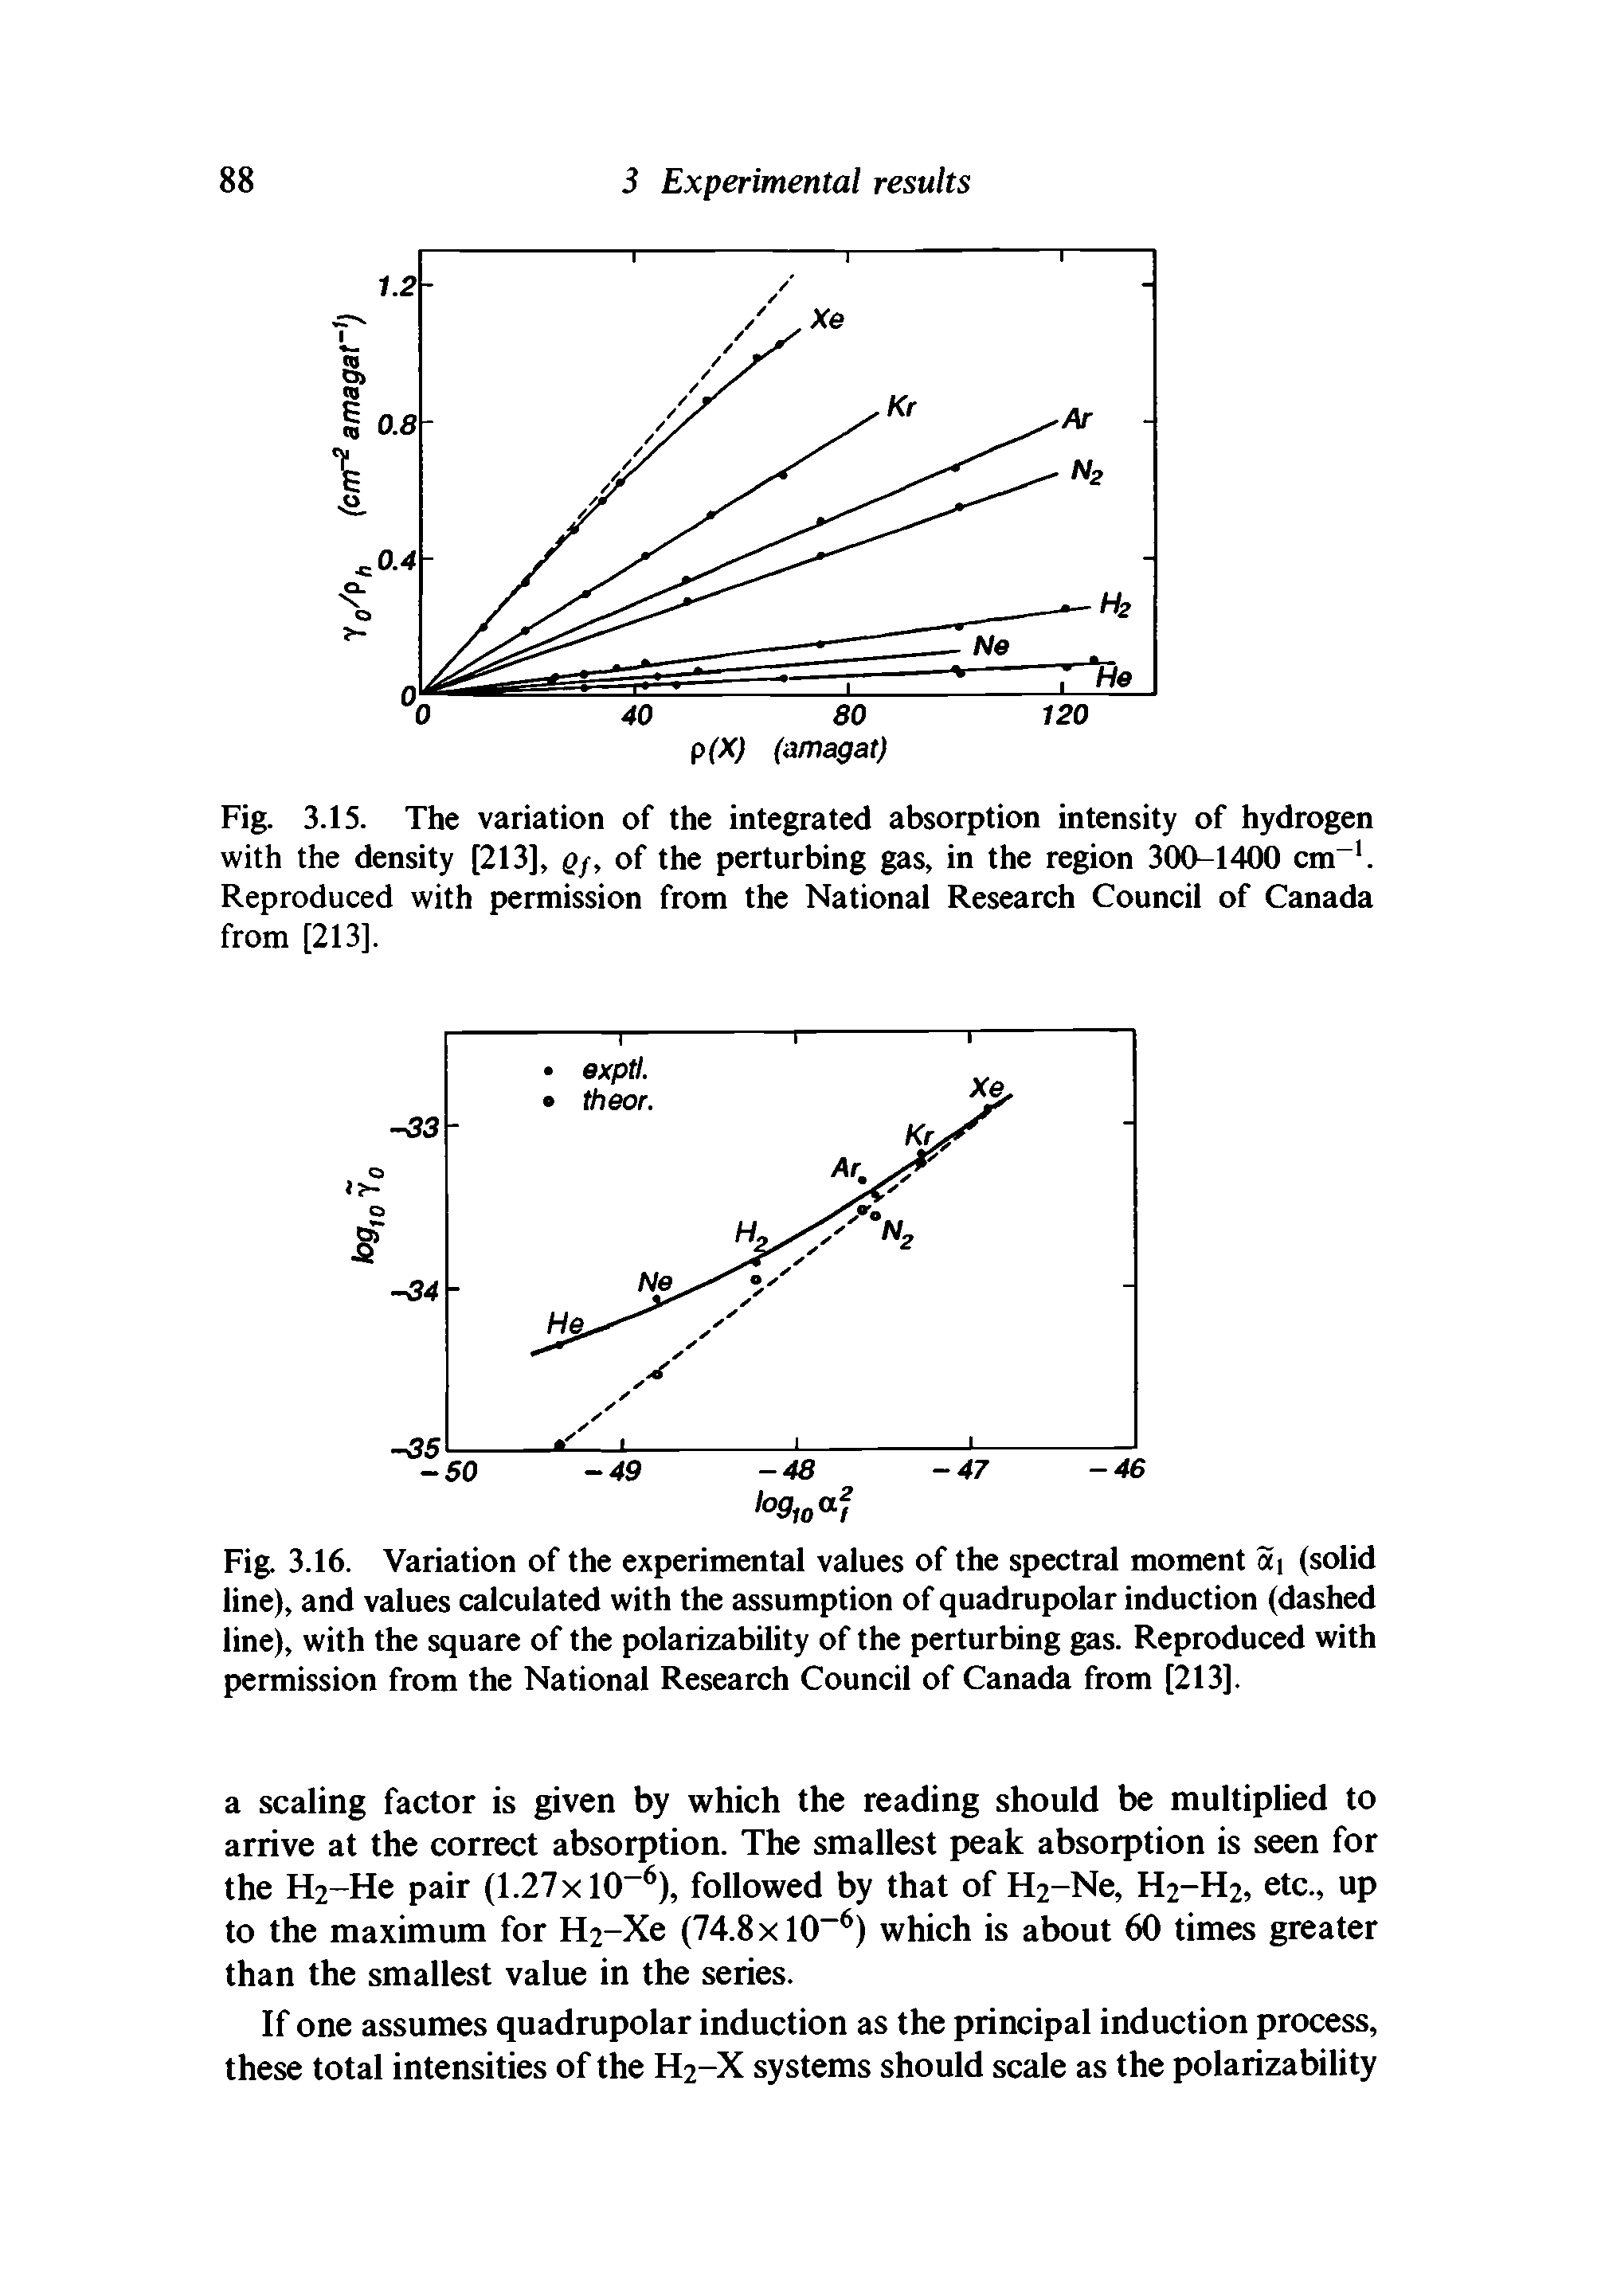 Fig. 3.15. The variation of the integrated absorption intensity of hydrogen with the density [213], Q, of the perturbing gas, in the region 300-1400 cm-1. Reproduced with permission from the National Research Council of Canada from [213],...